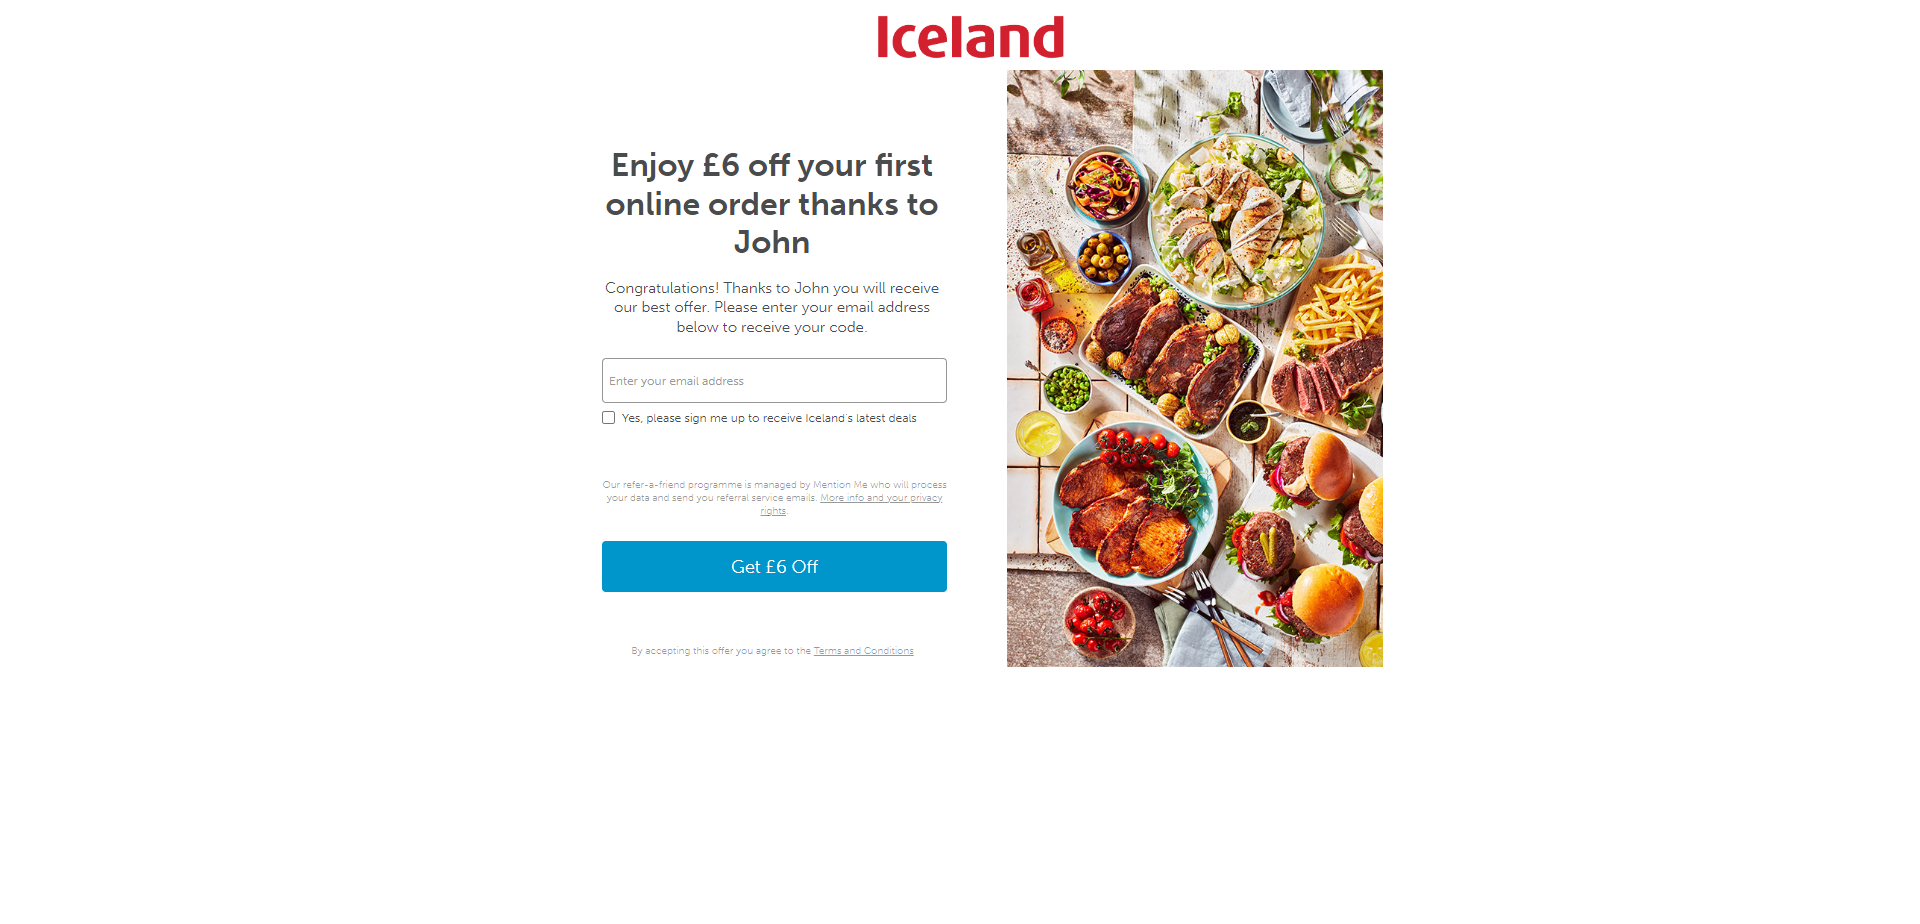 Referral Landing Page for Iceland